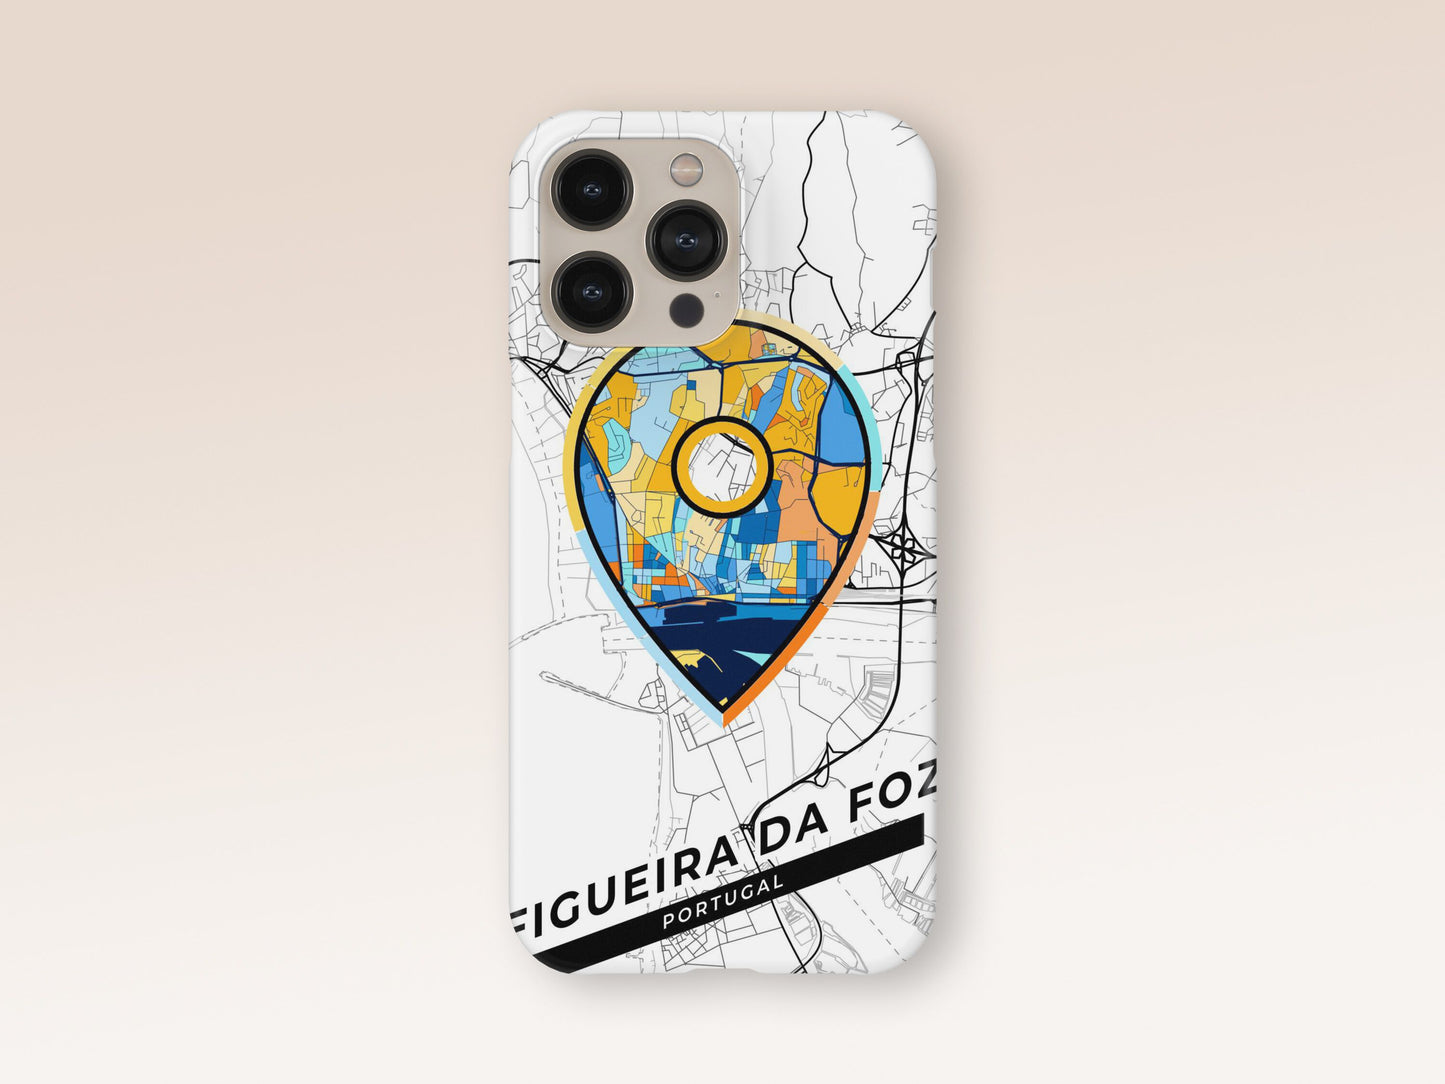 Figueira Da Foz Portugal slim phone case with colorful icon. Birthday, wedding or housewarming gift. Couple match cases. 1